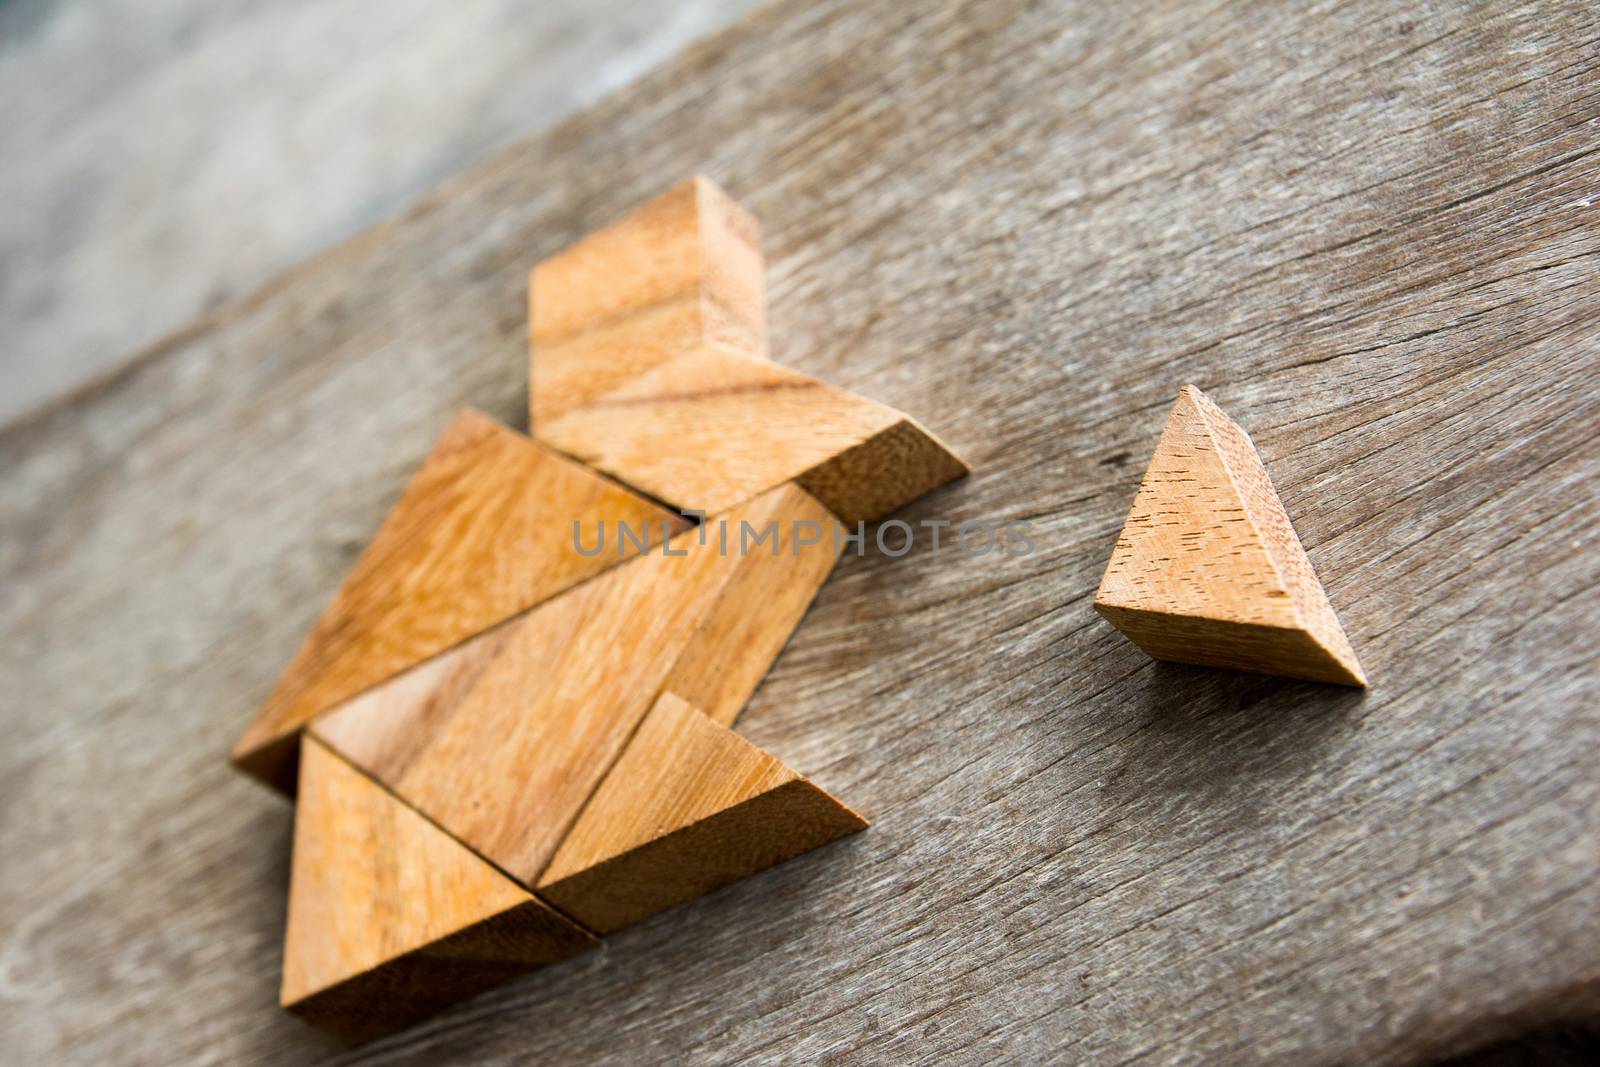 Wooden tangram puzzle wait to fulfill home shape for build dream by Hengpattanapong